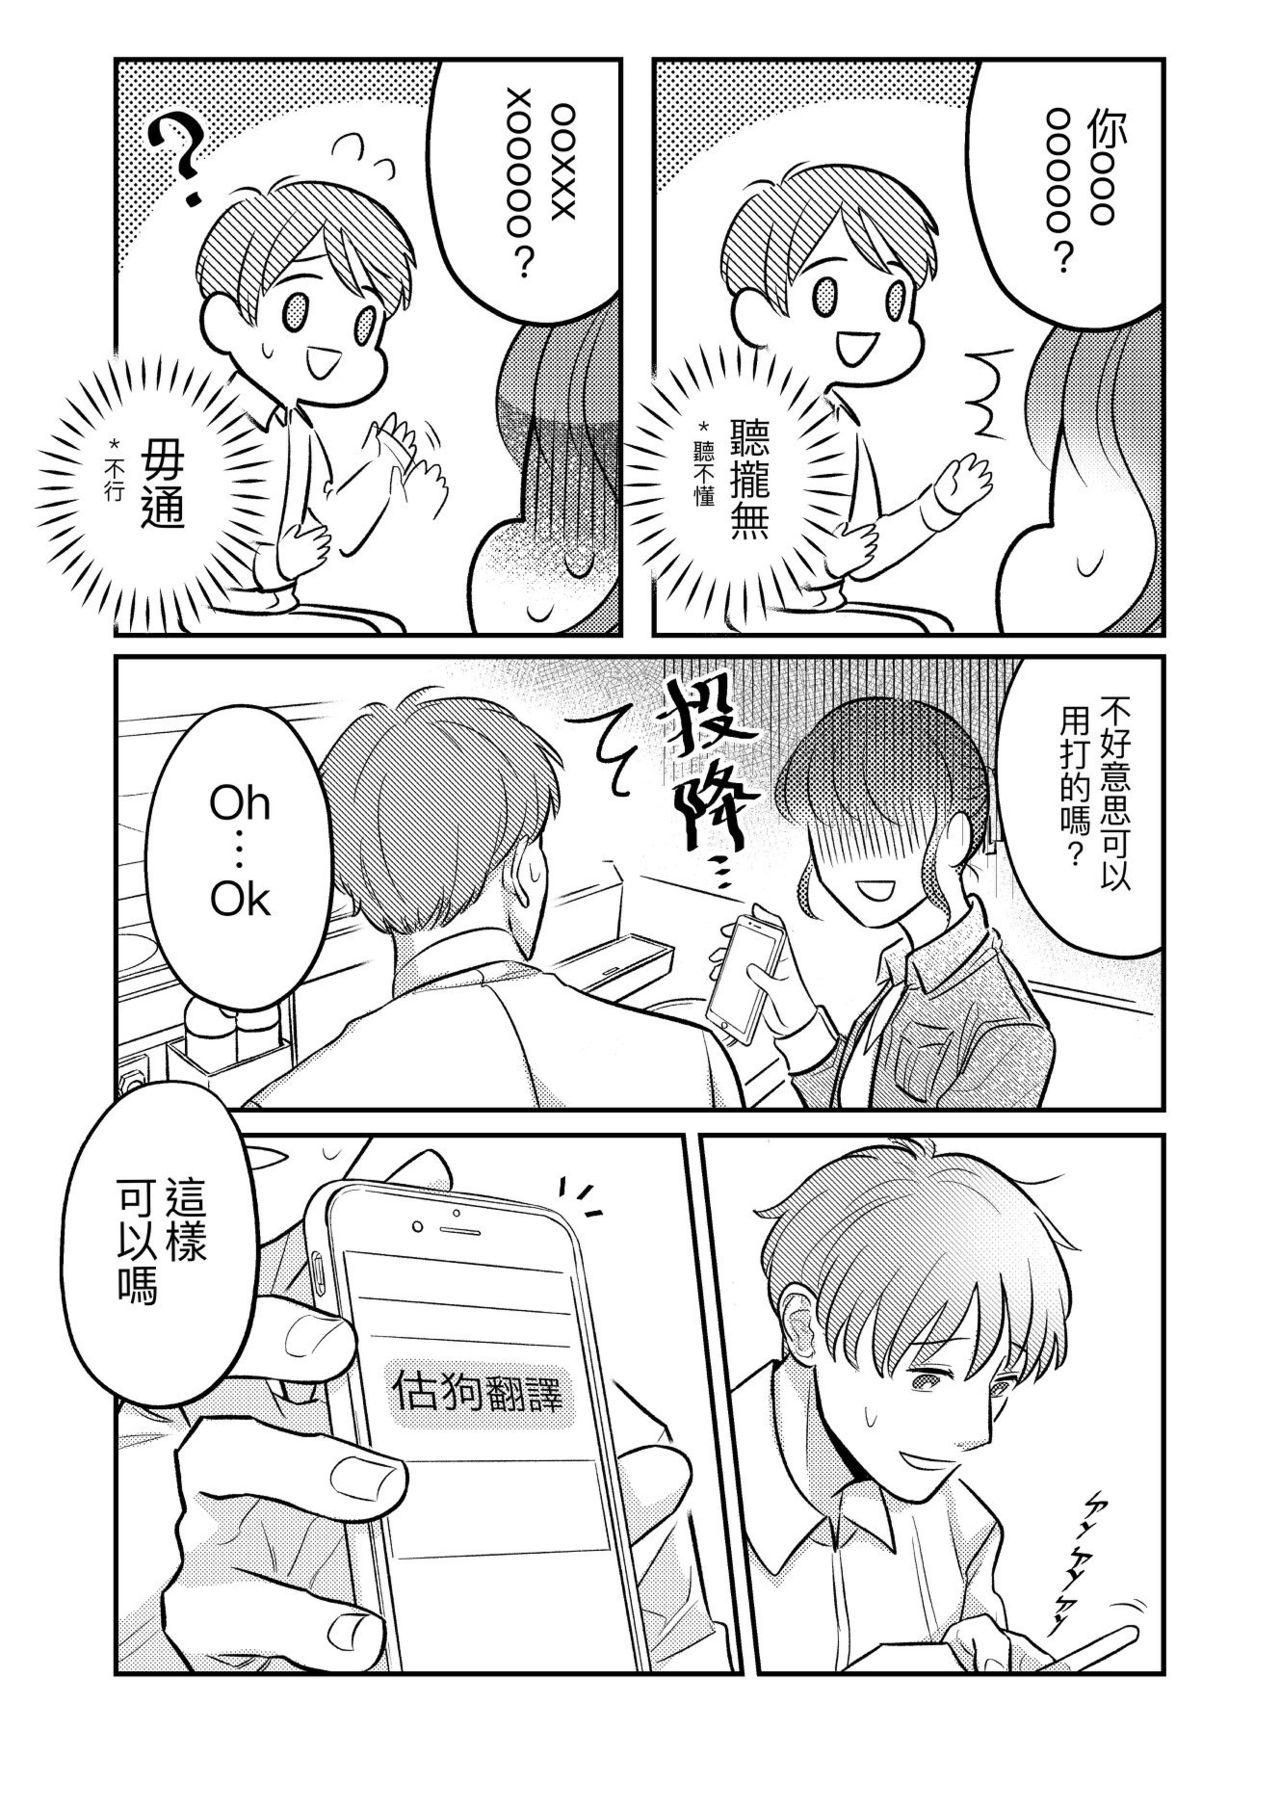 Pussylick T子啪啪走2 | T-Chan's Sexual Journey 2 - Original Foreplay - Page 6